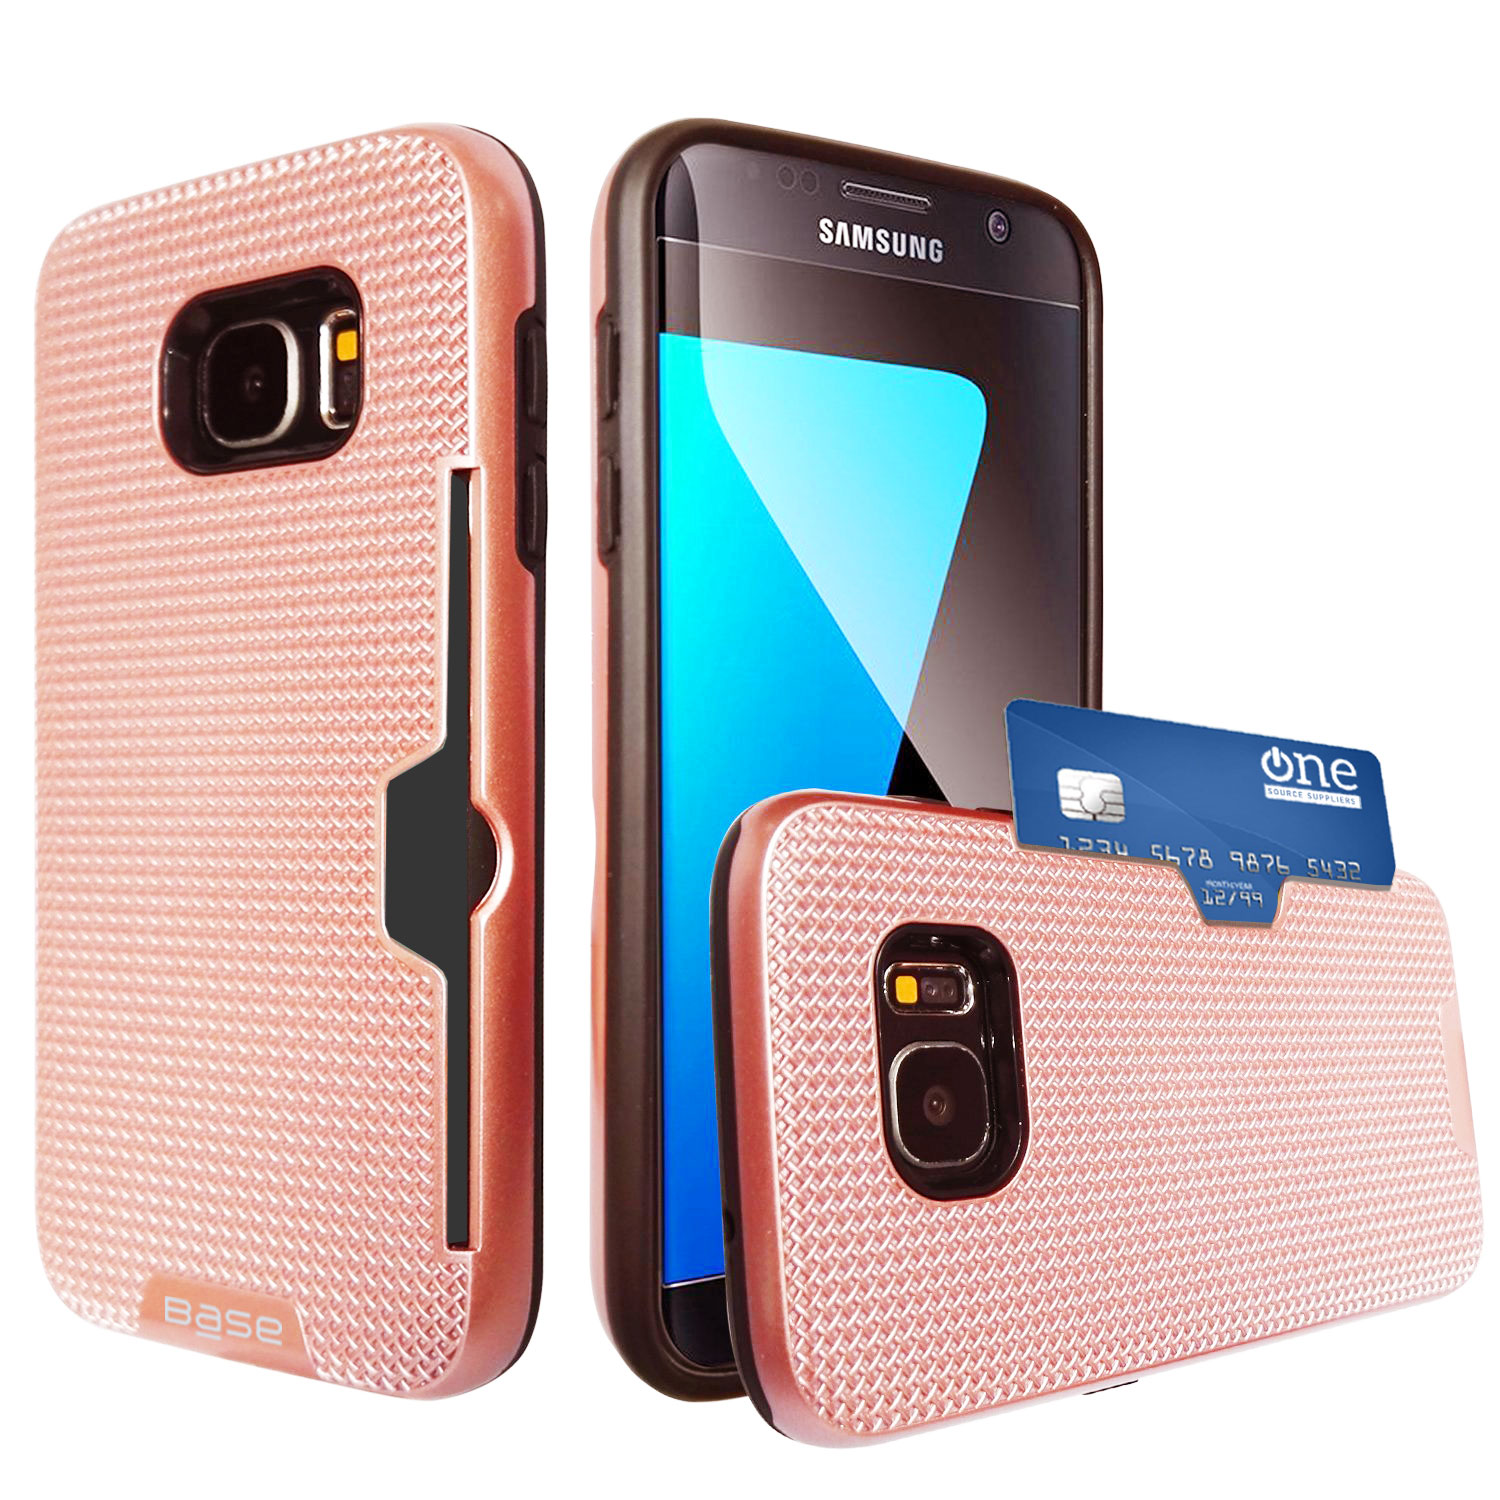 Base DuraFit Stowaway - Dual Layer Protective Credit Card Case for Samsung Galaxy S7 - Rose Gold